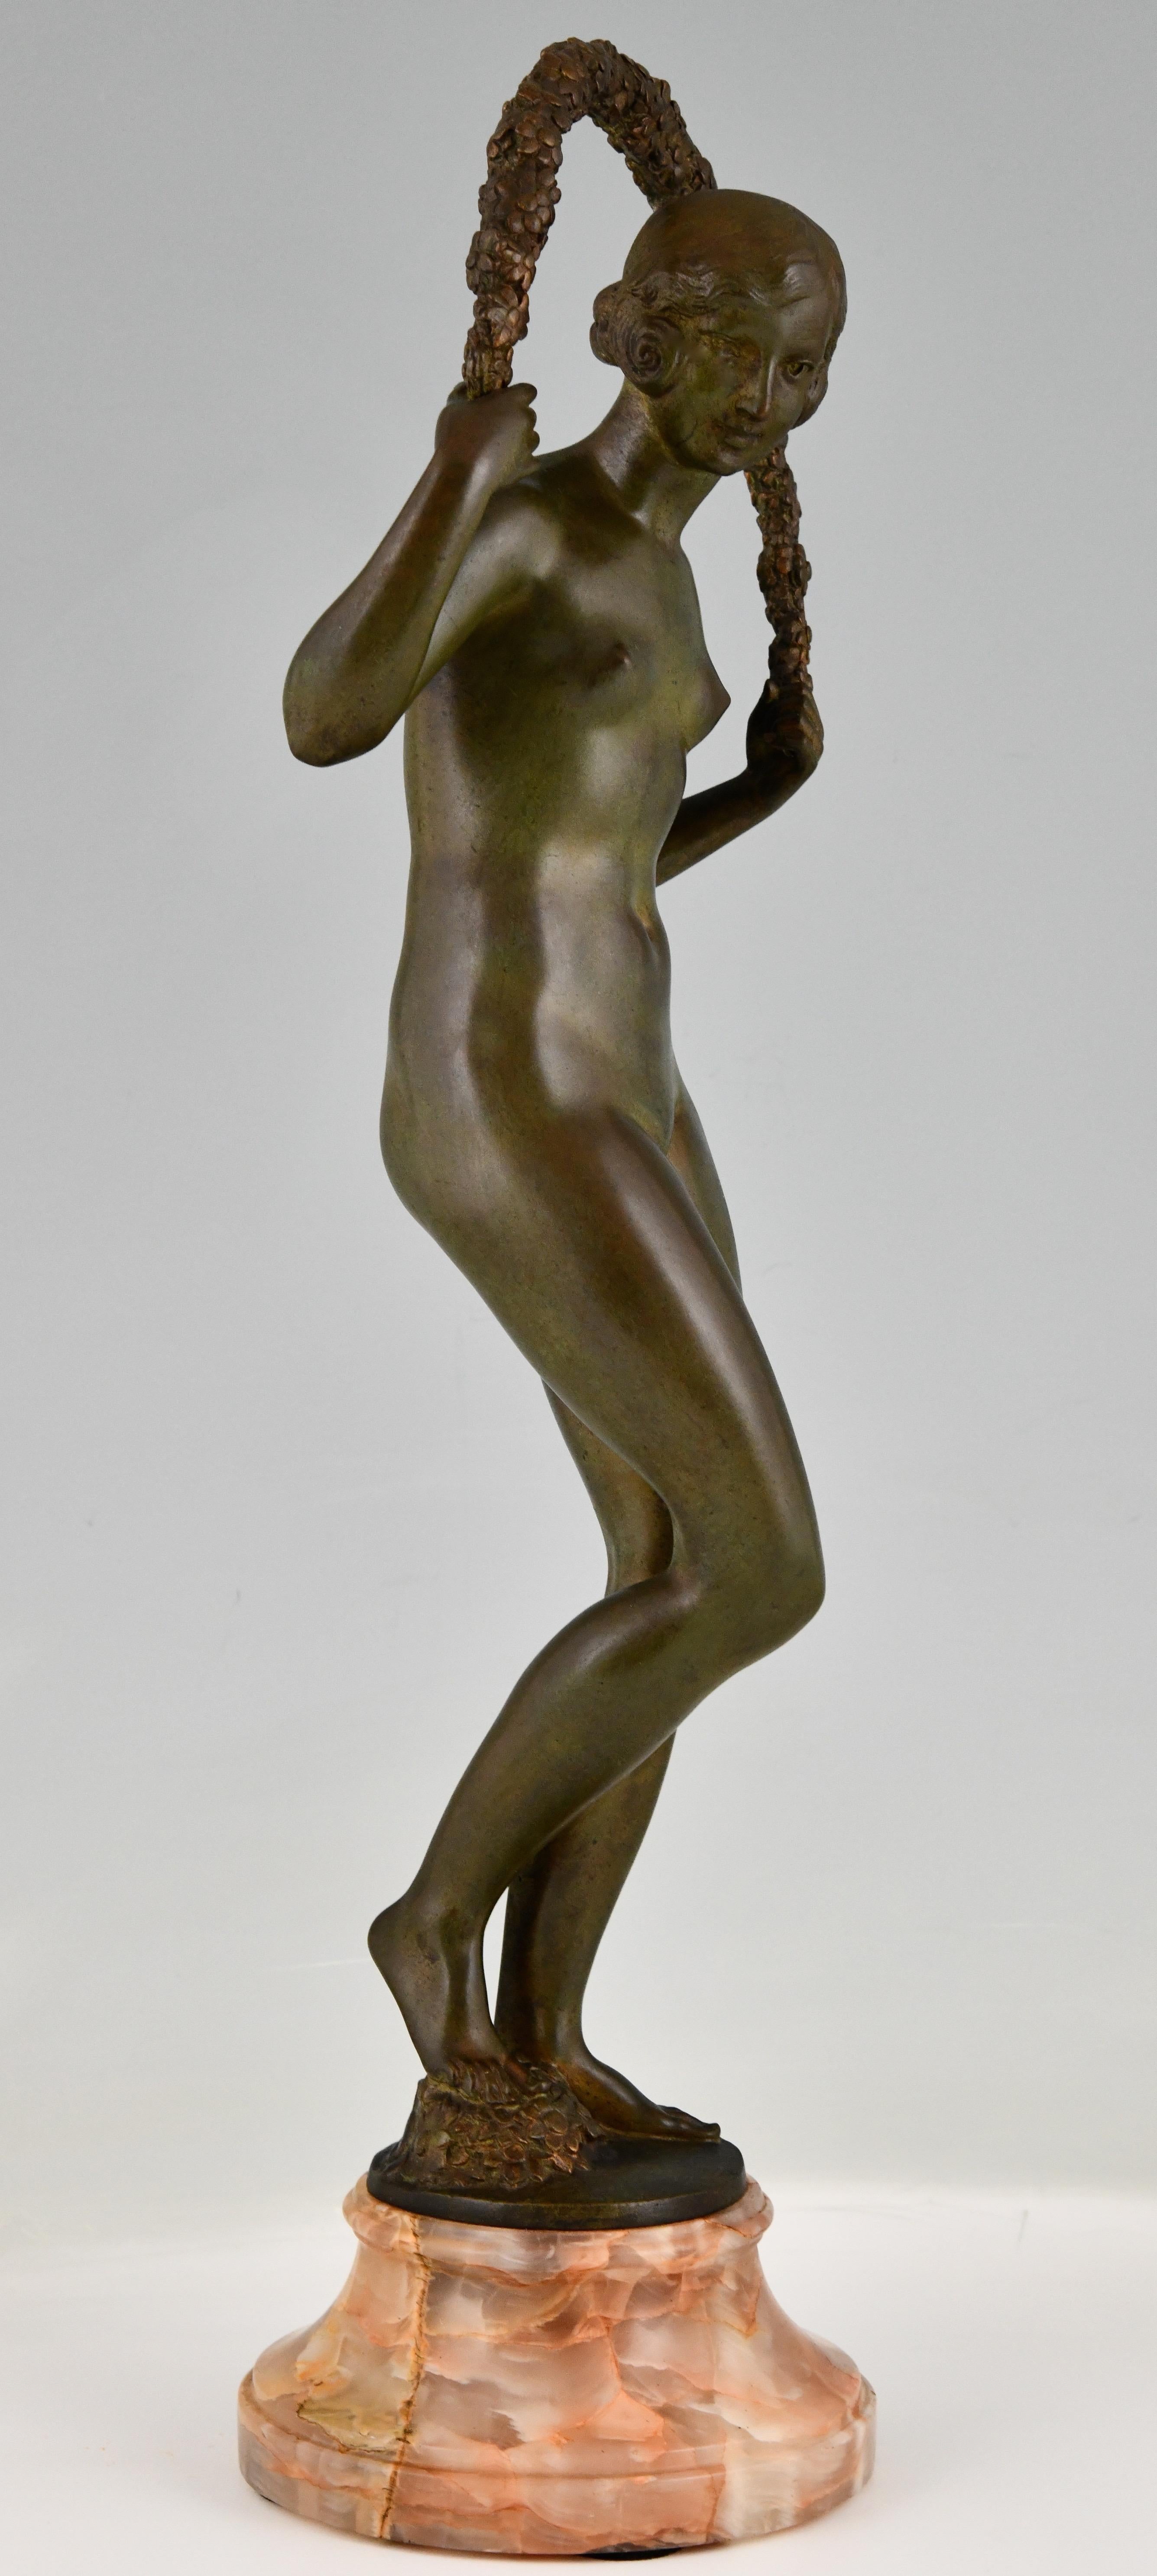 Patinated Art Deco Bronze Sculpture Nude with Garland by Joe Descomps Cormier 1925 For Sale